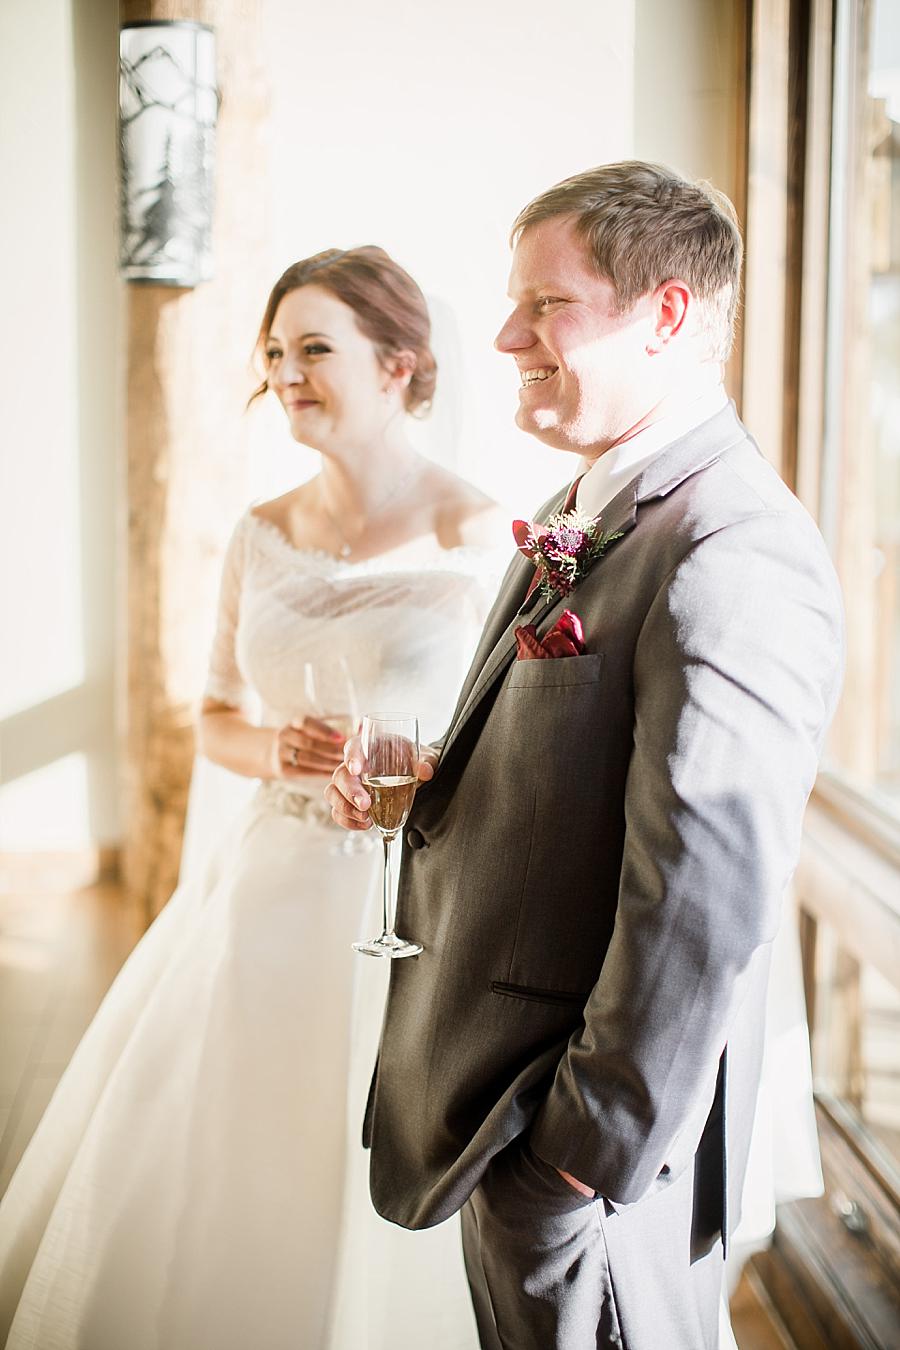 The Mr. and Mrs. at this Colorado Destination Wedding by Knoxville Wedding Photographer, Amanda May Photos.